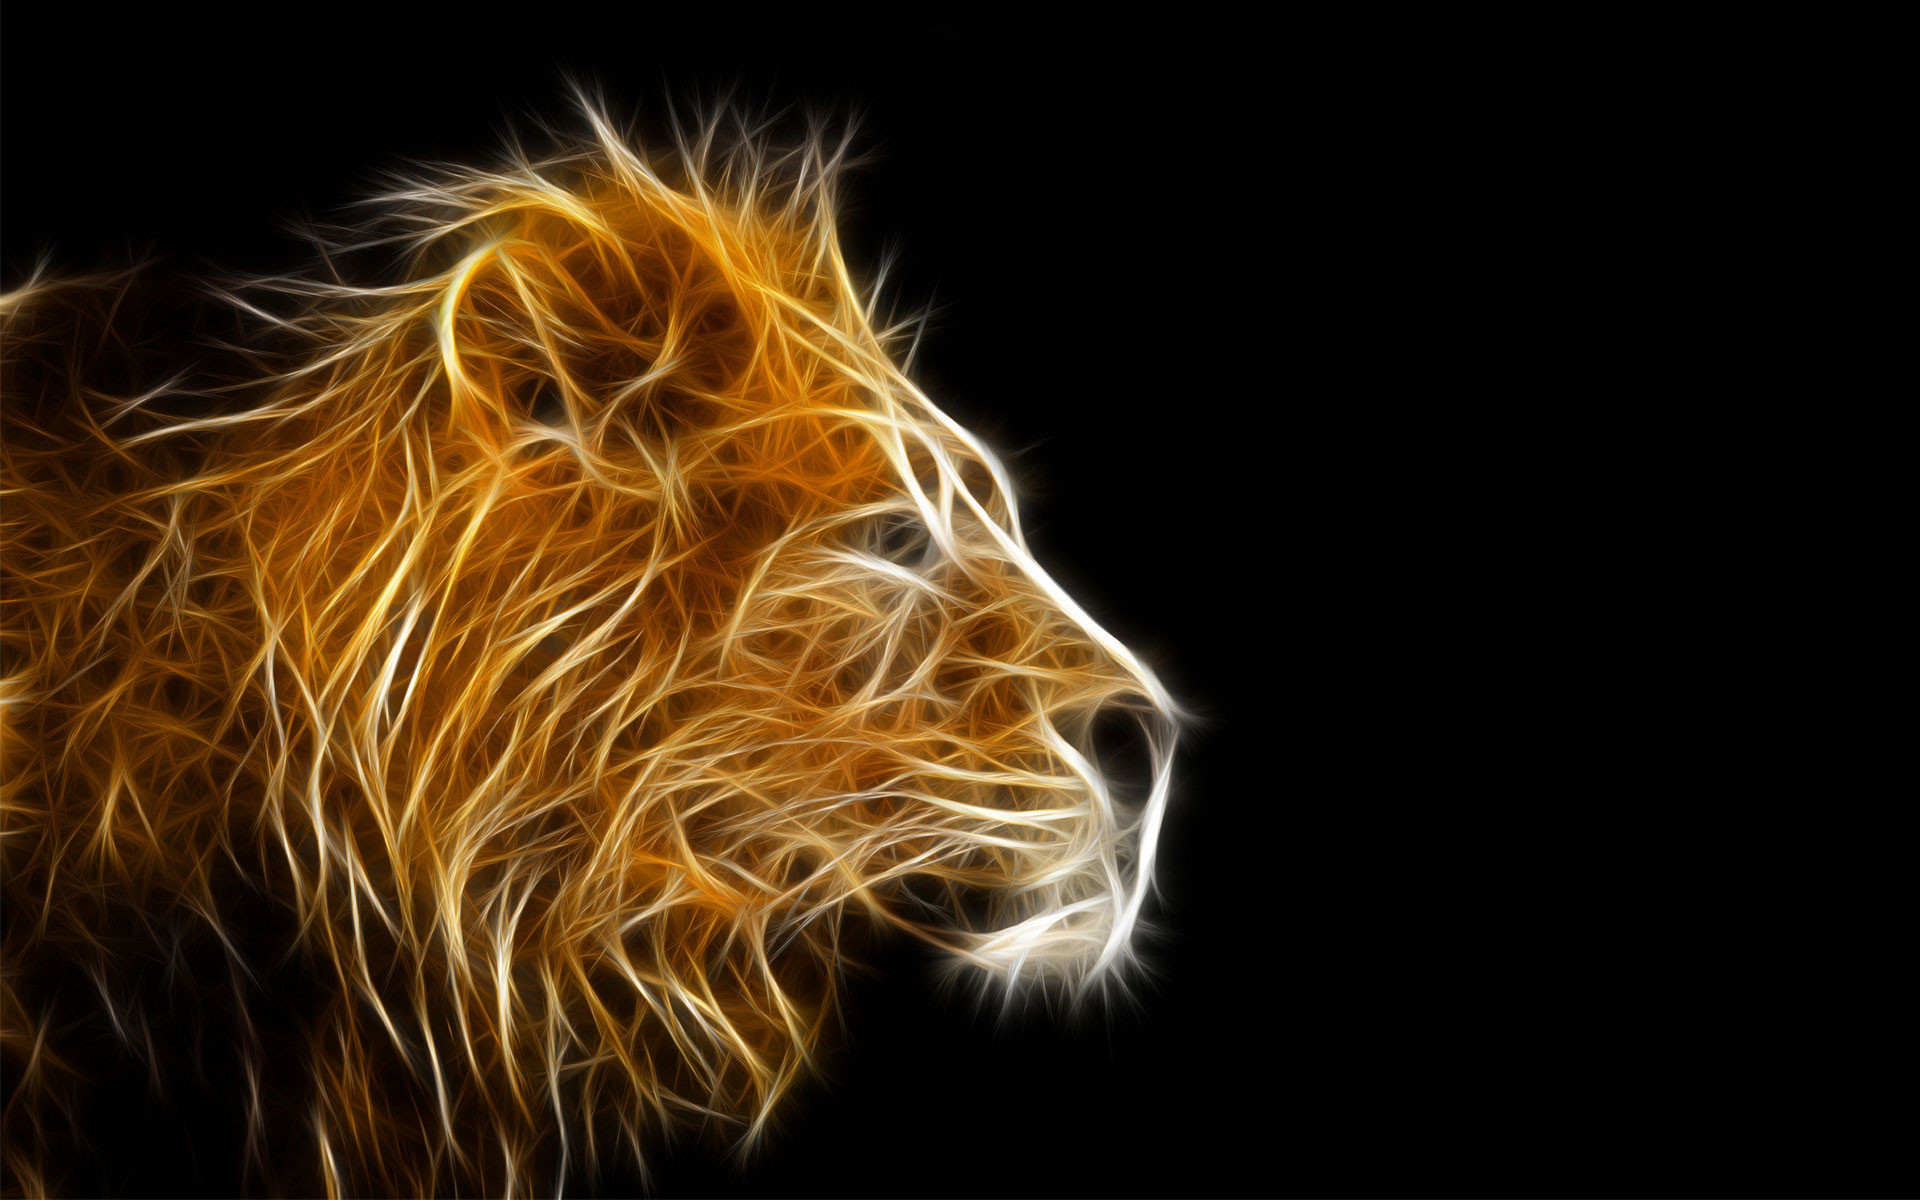 1920x1200 Cool Animal wallpapers Free Download Hd Backgrounds - HD Wallpapers